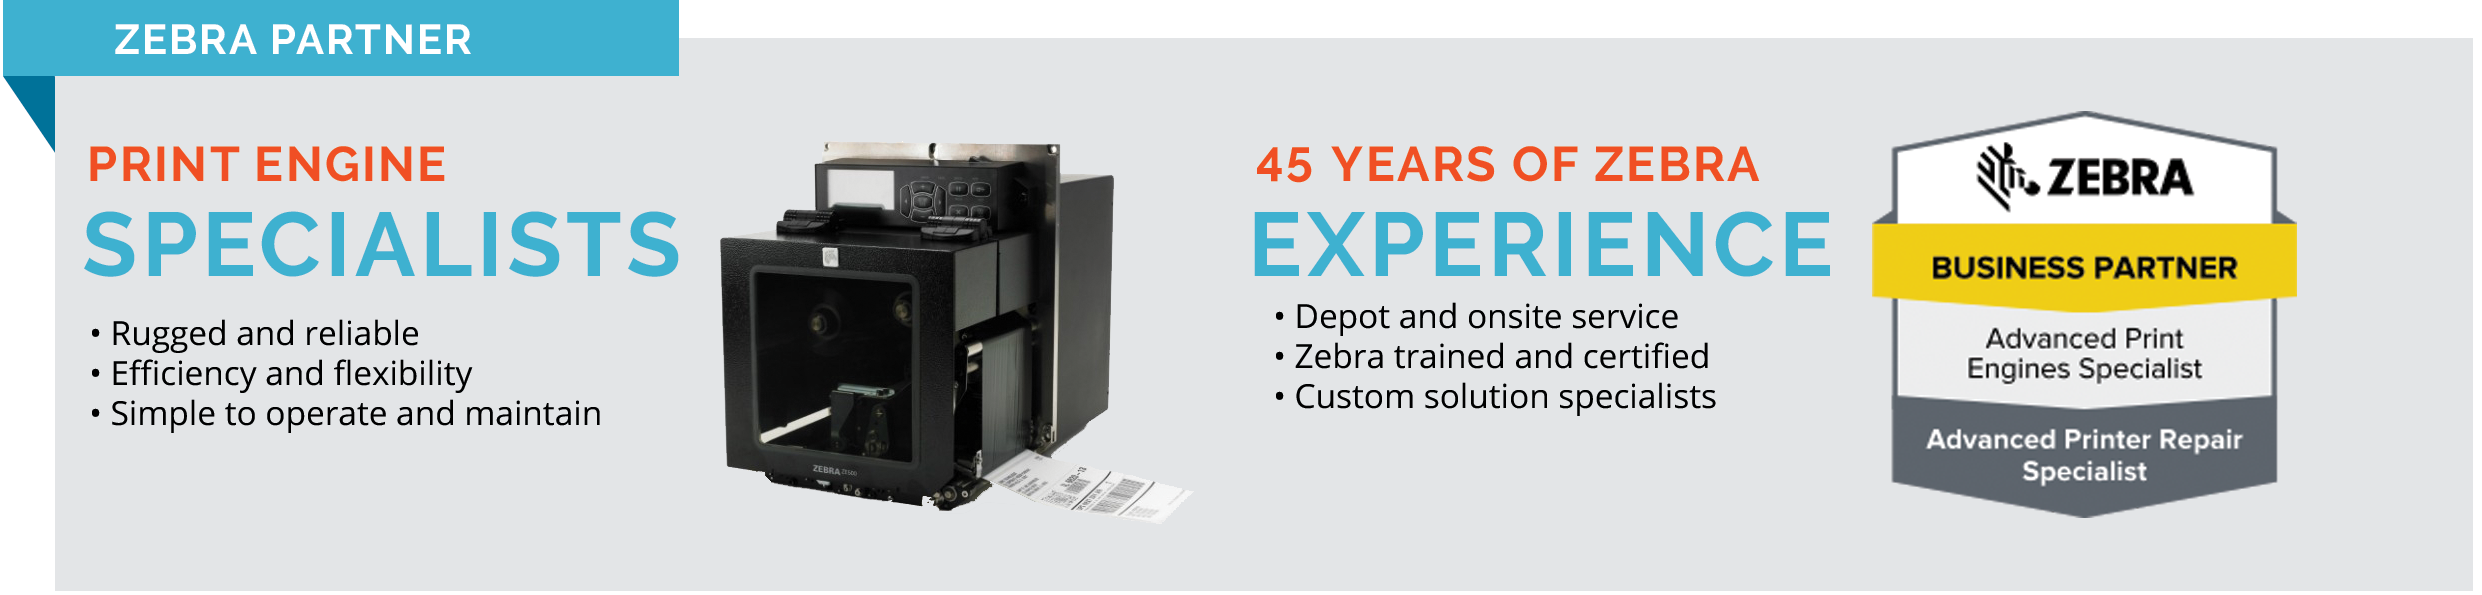 Zebra advanced print engine and printer repair specialist. Zebra trained and certified with 45 years of experience.